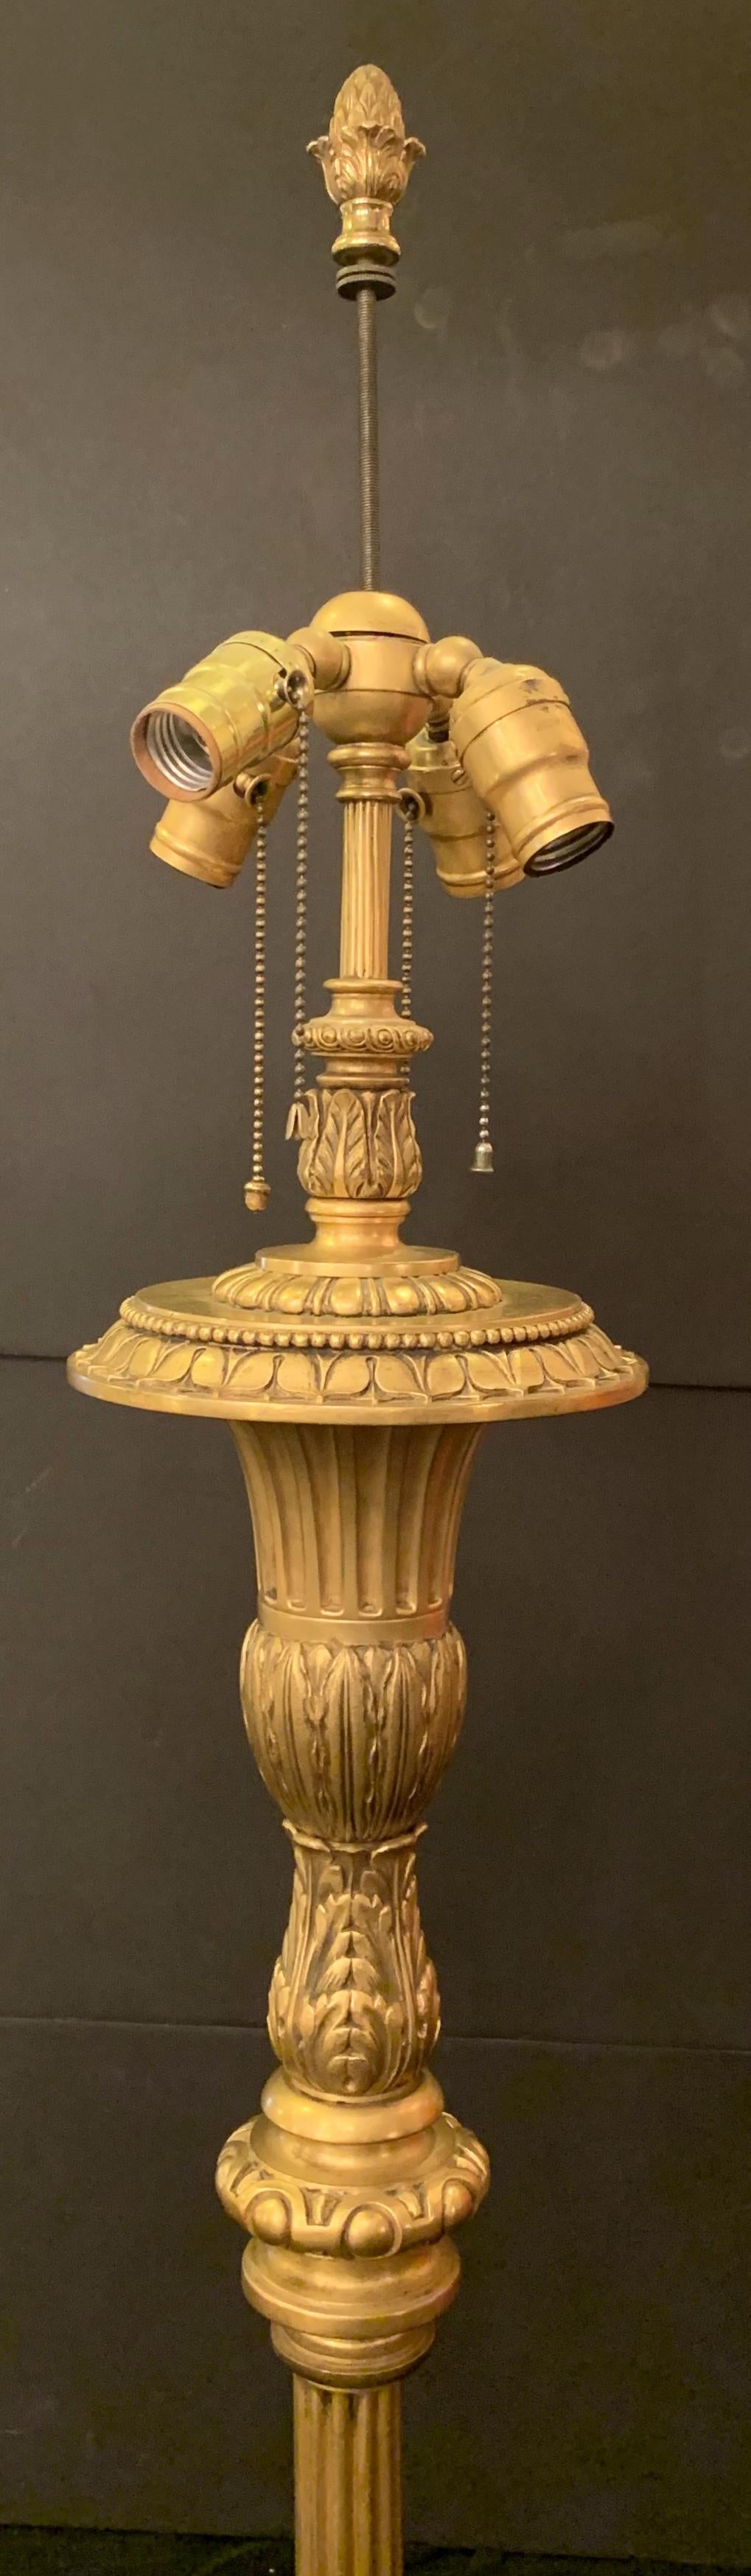 A wonderful French gilt urn form and filigree regency gilt bronze floor lamp in the manner and high quality of E.F. Caldwell with 4 Edison lights and adjustable height center.
Rewired and ready to enjoy.